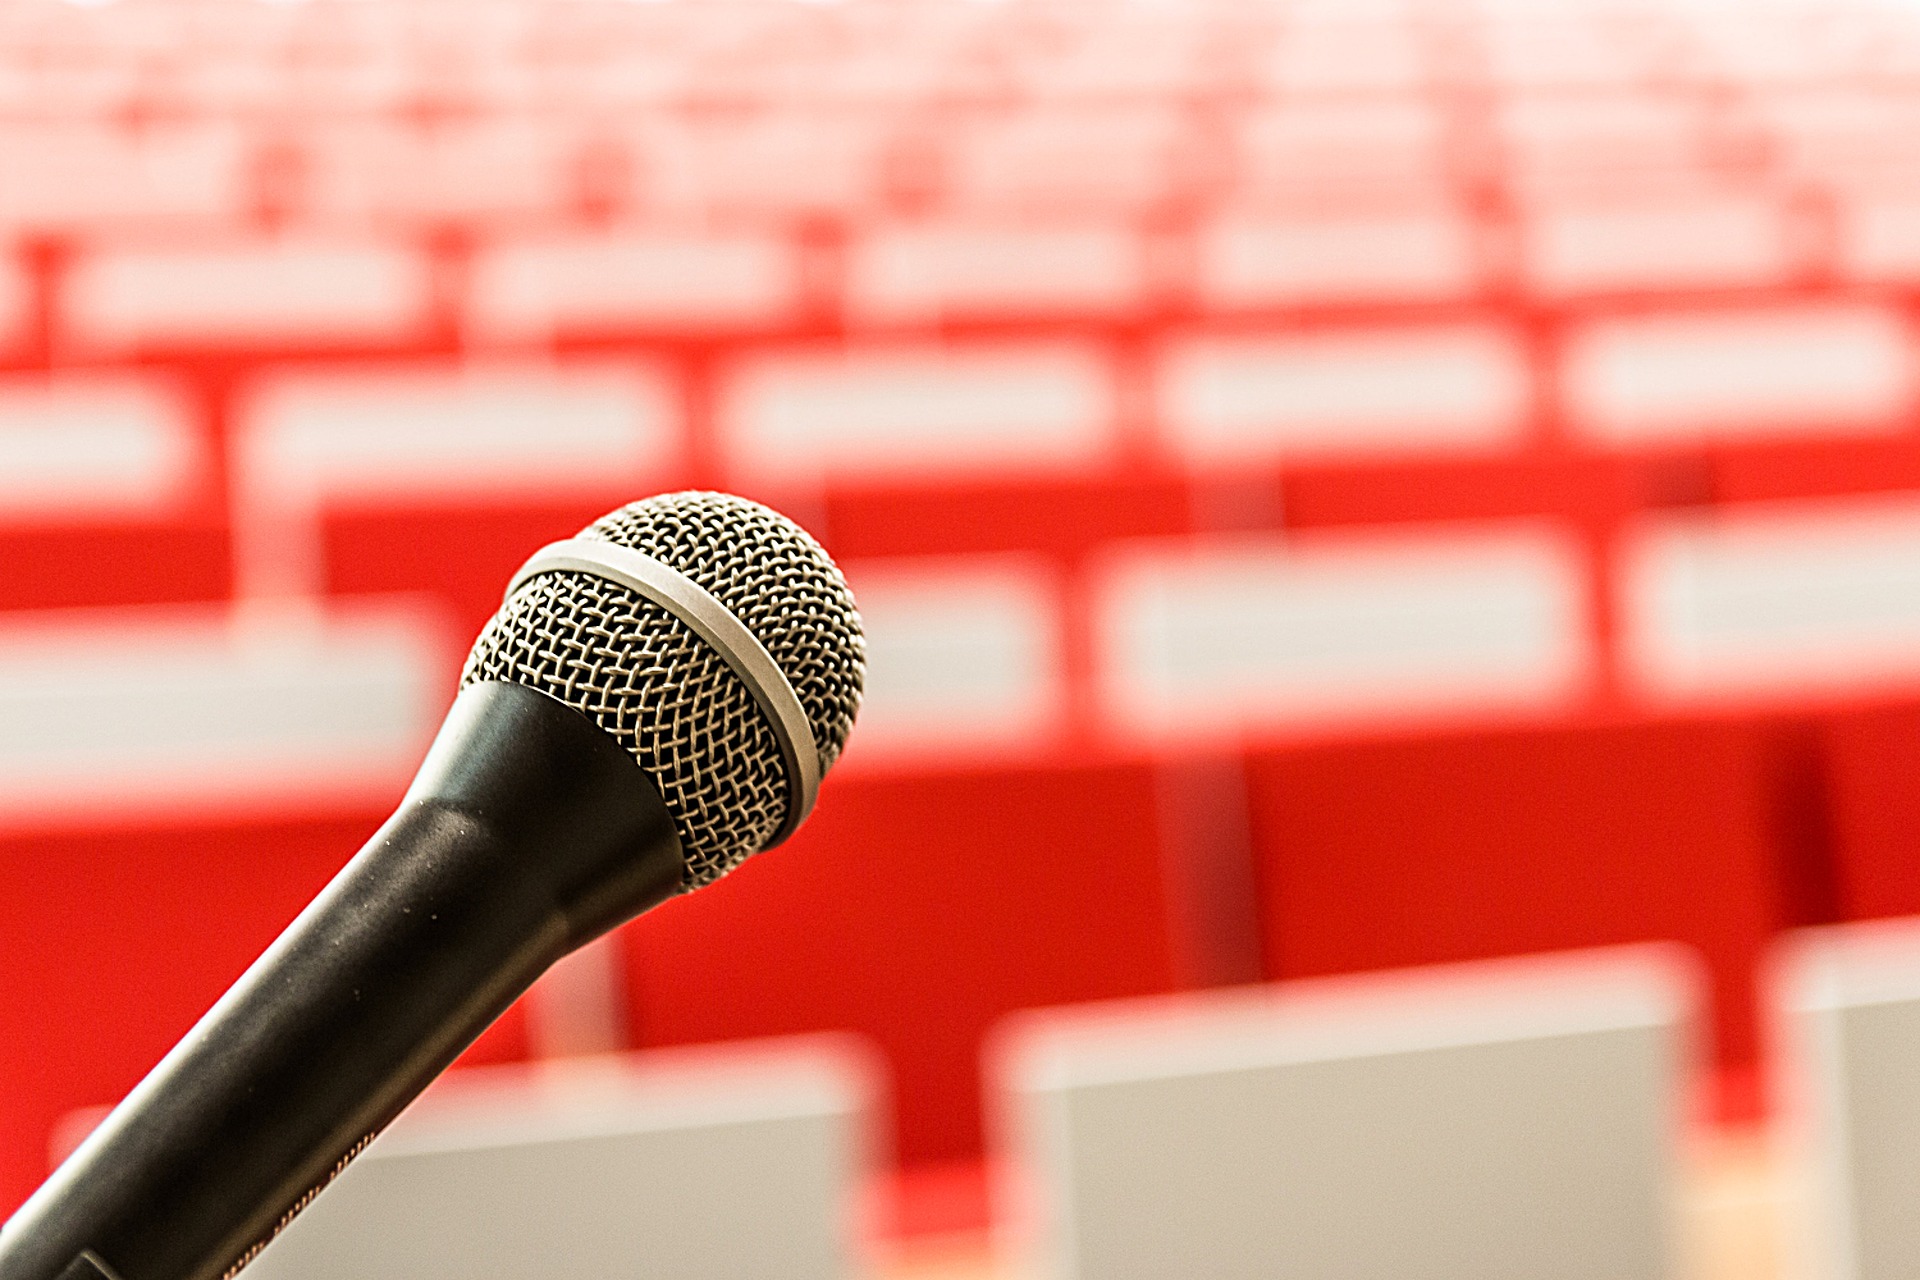 microphone with auditorium seats in the background